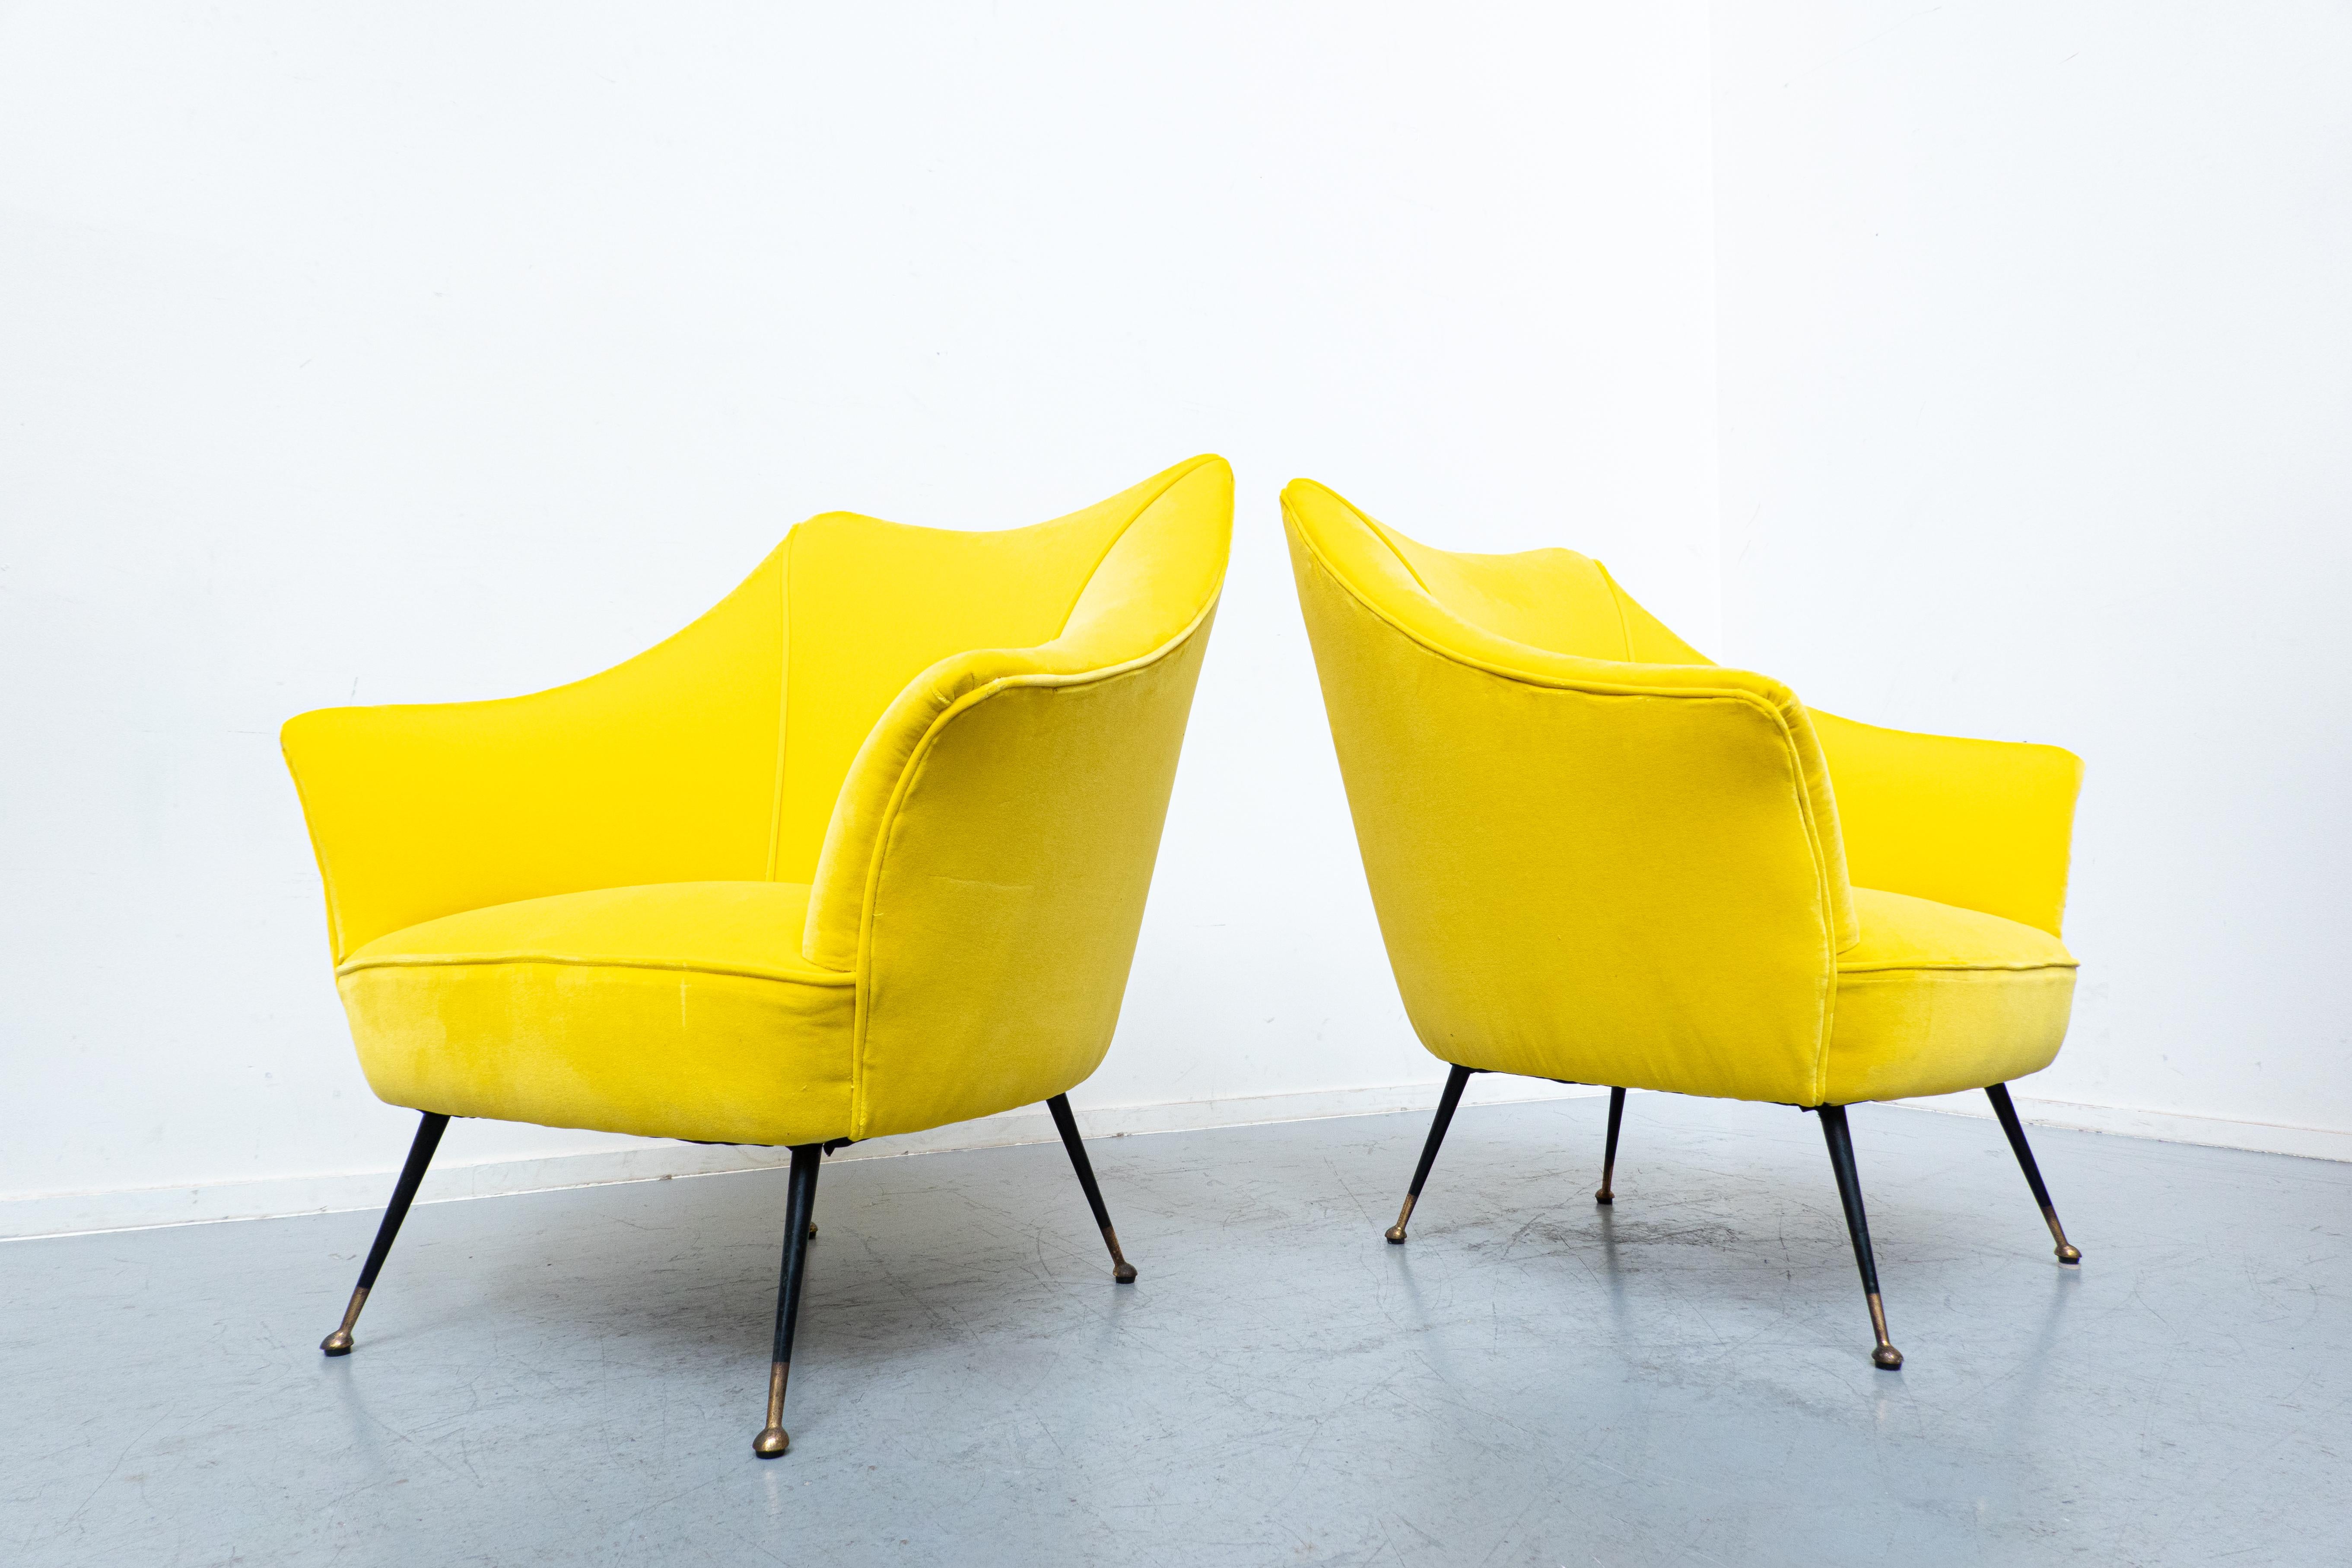 Pair of Mid-Century Modern Italian yellow armchairs, 1960s
This pair of italian armchairs was reupholstered in yellow fabric.